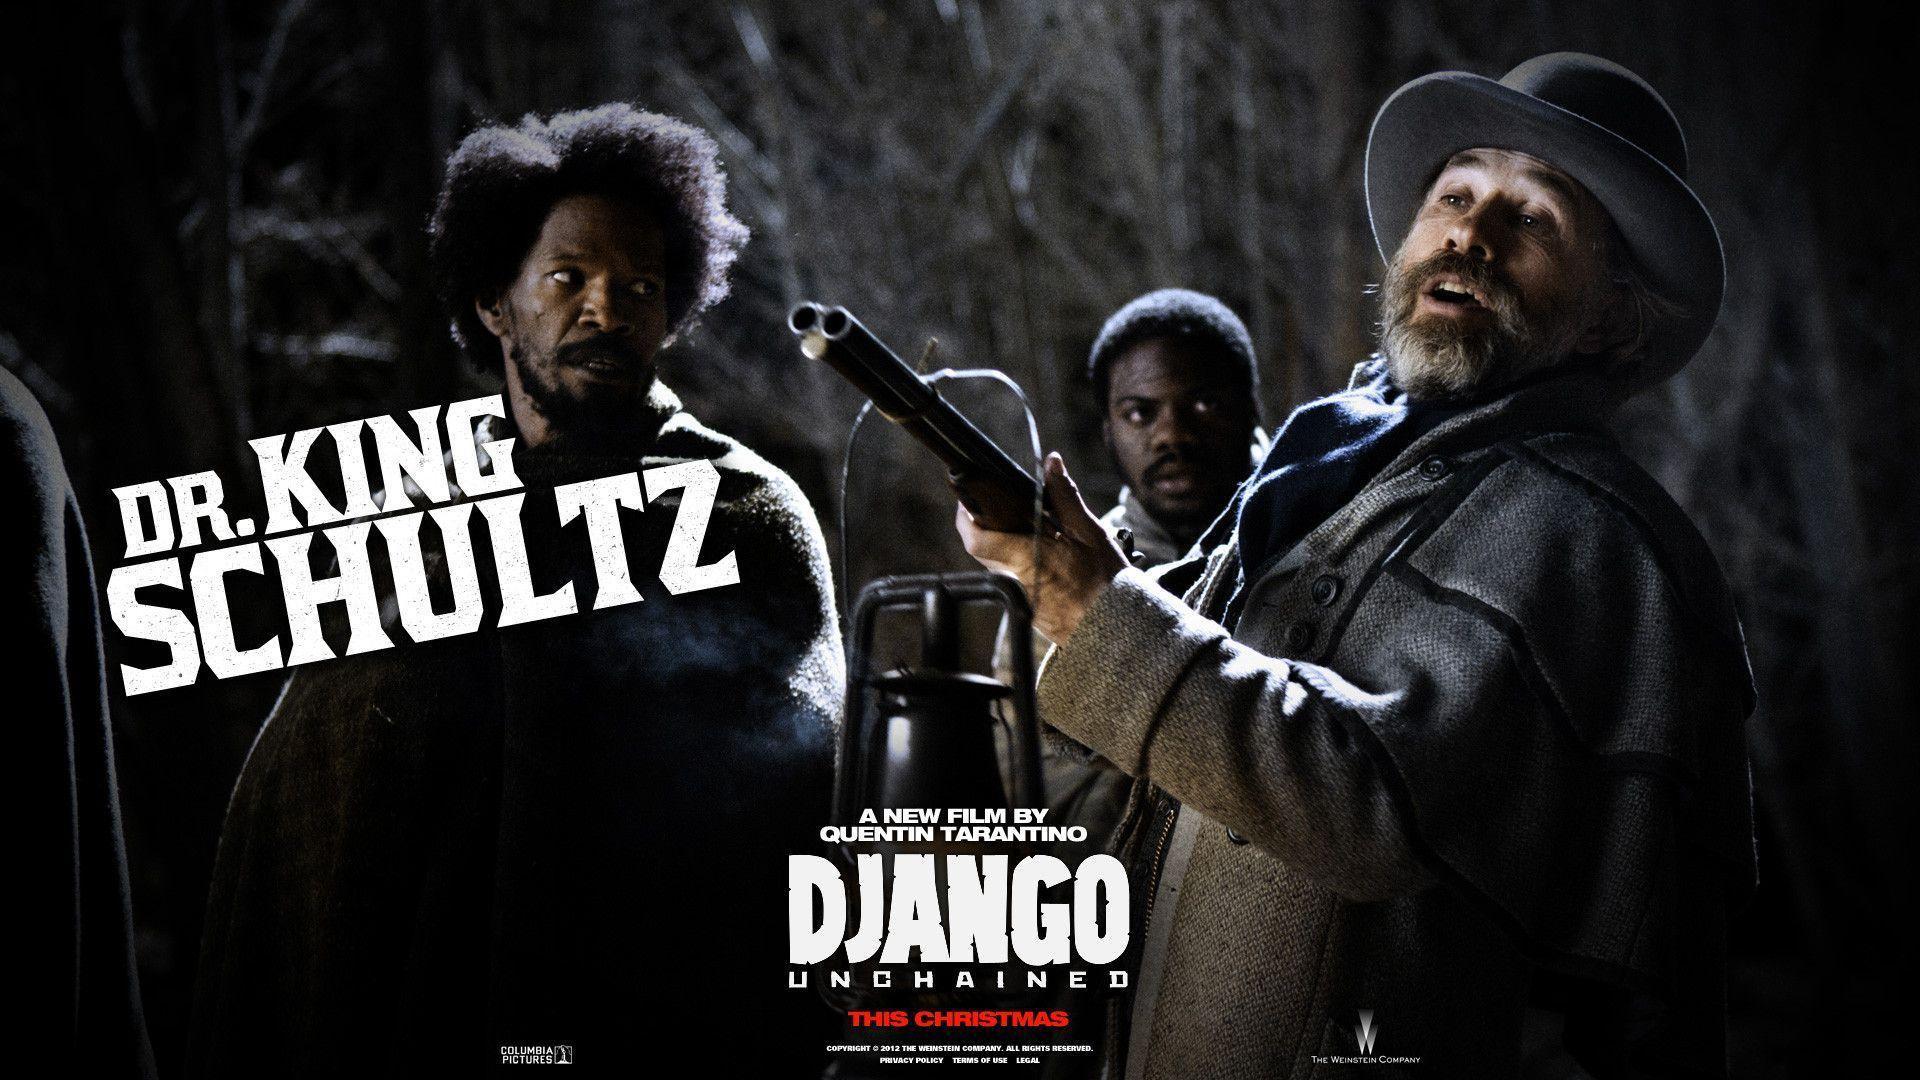 Check out new promo clip and wallpaper for Django Unchained